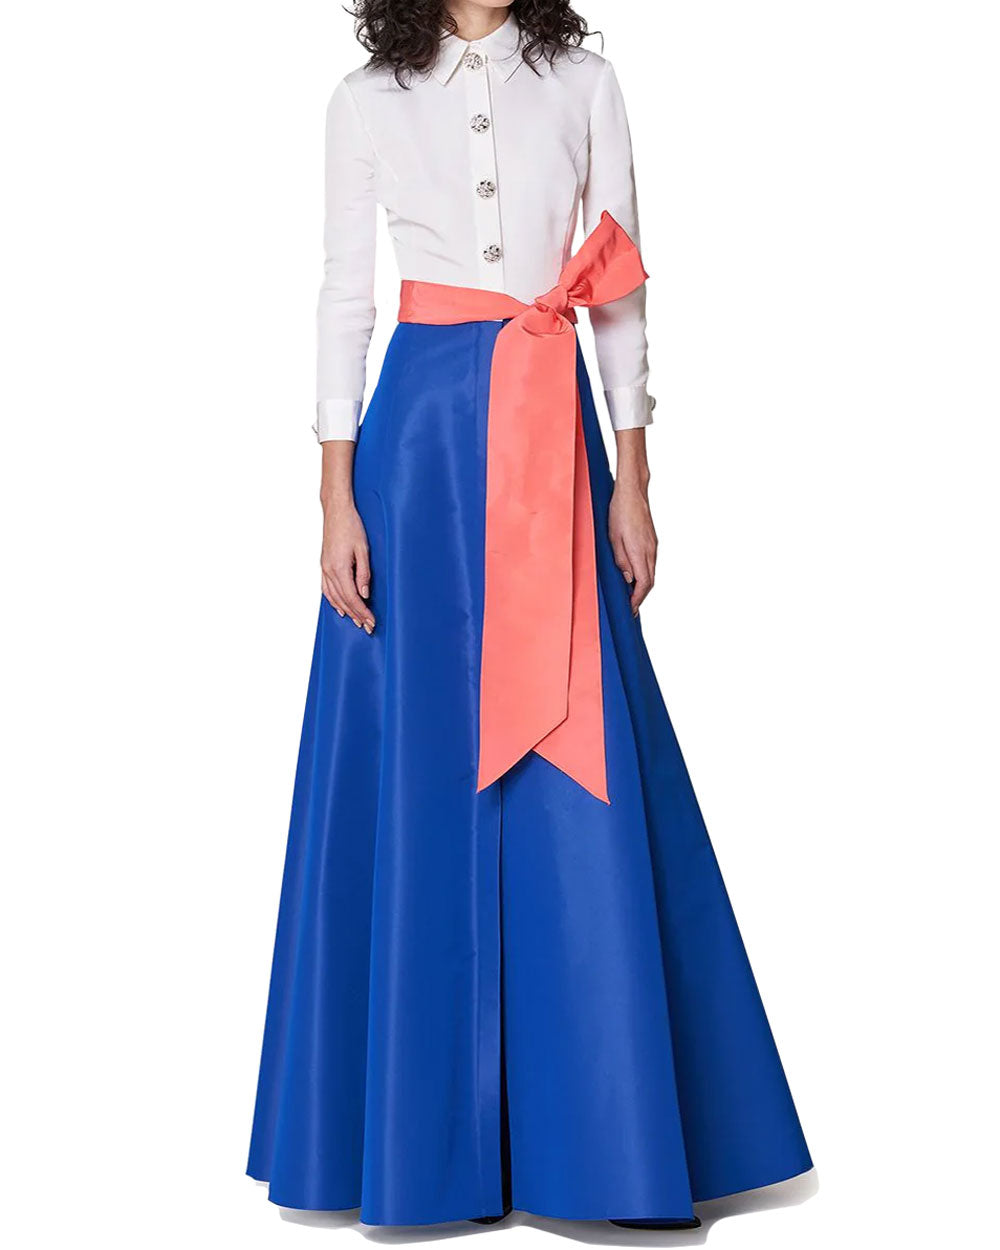 Bow Detail Shirt Gown in Cobalt and White